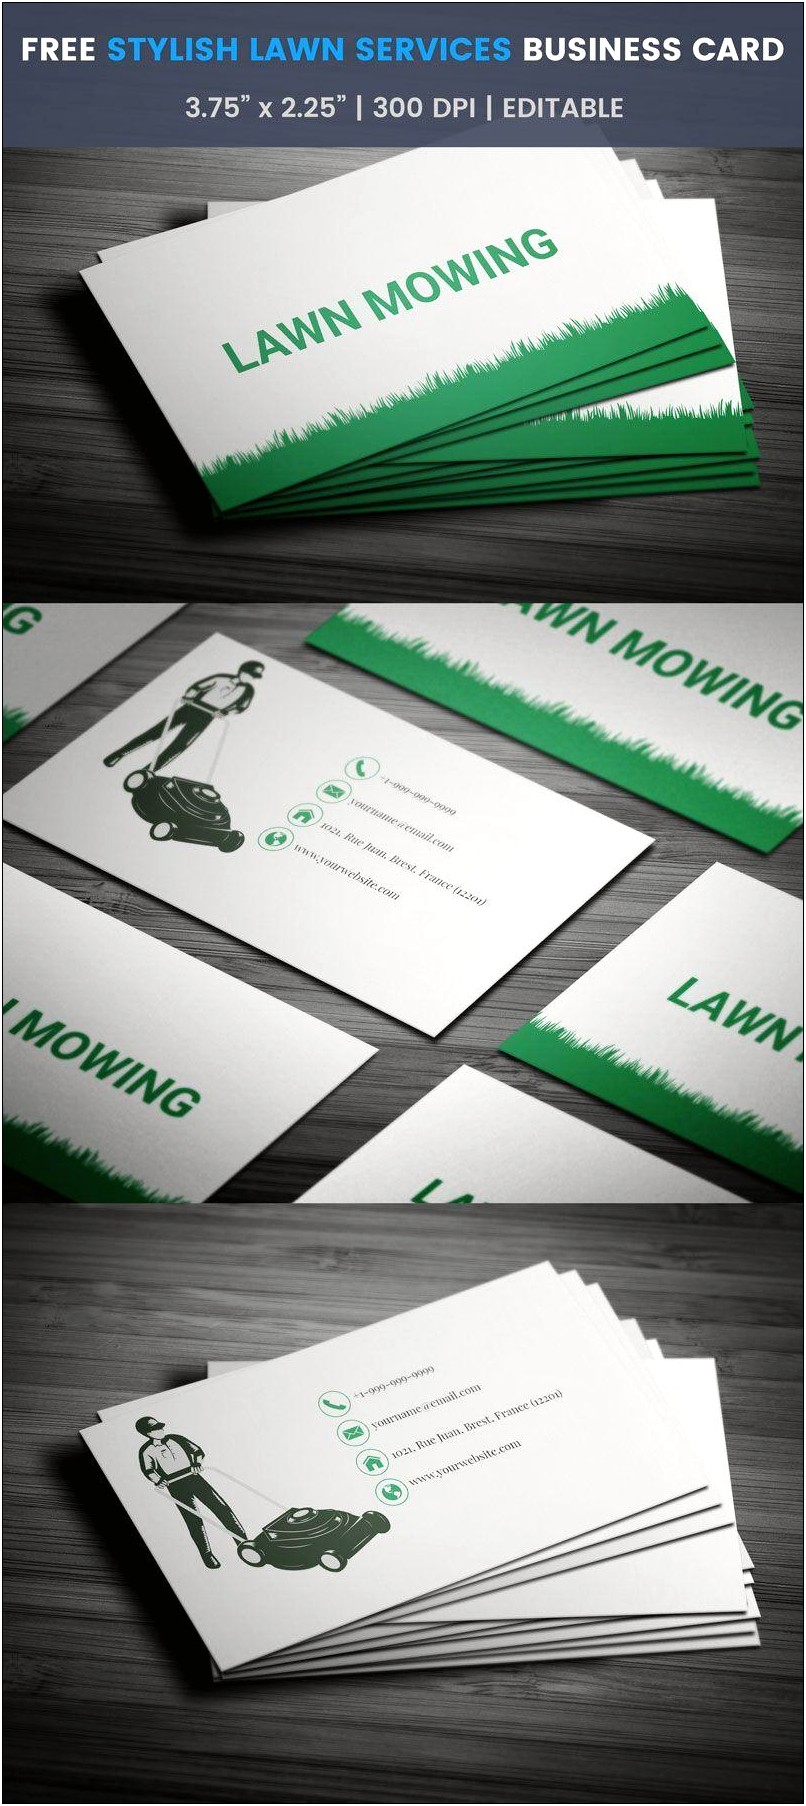 Free Lawn Mowing Business Cards Template